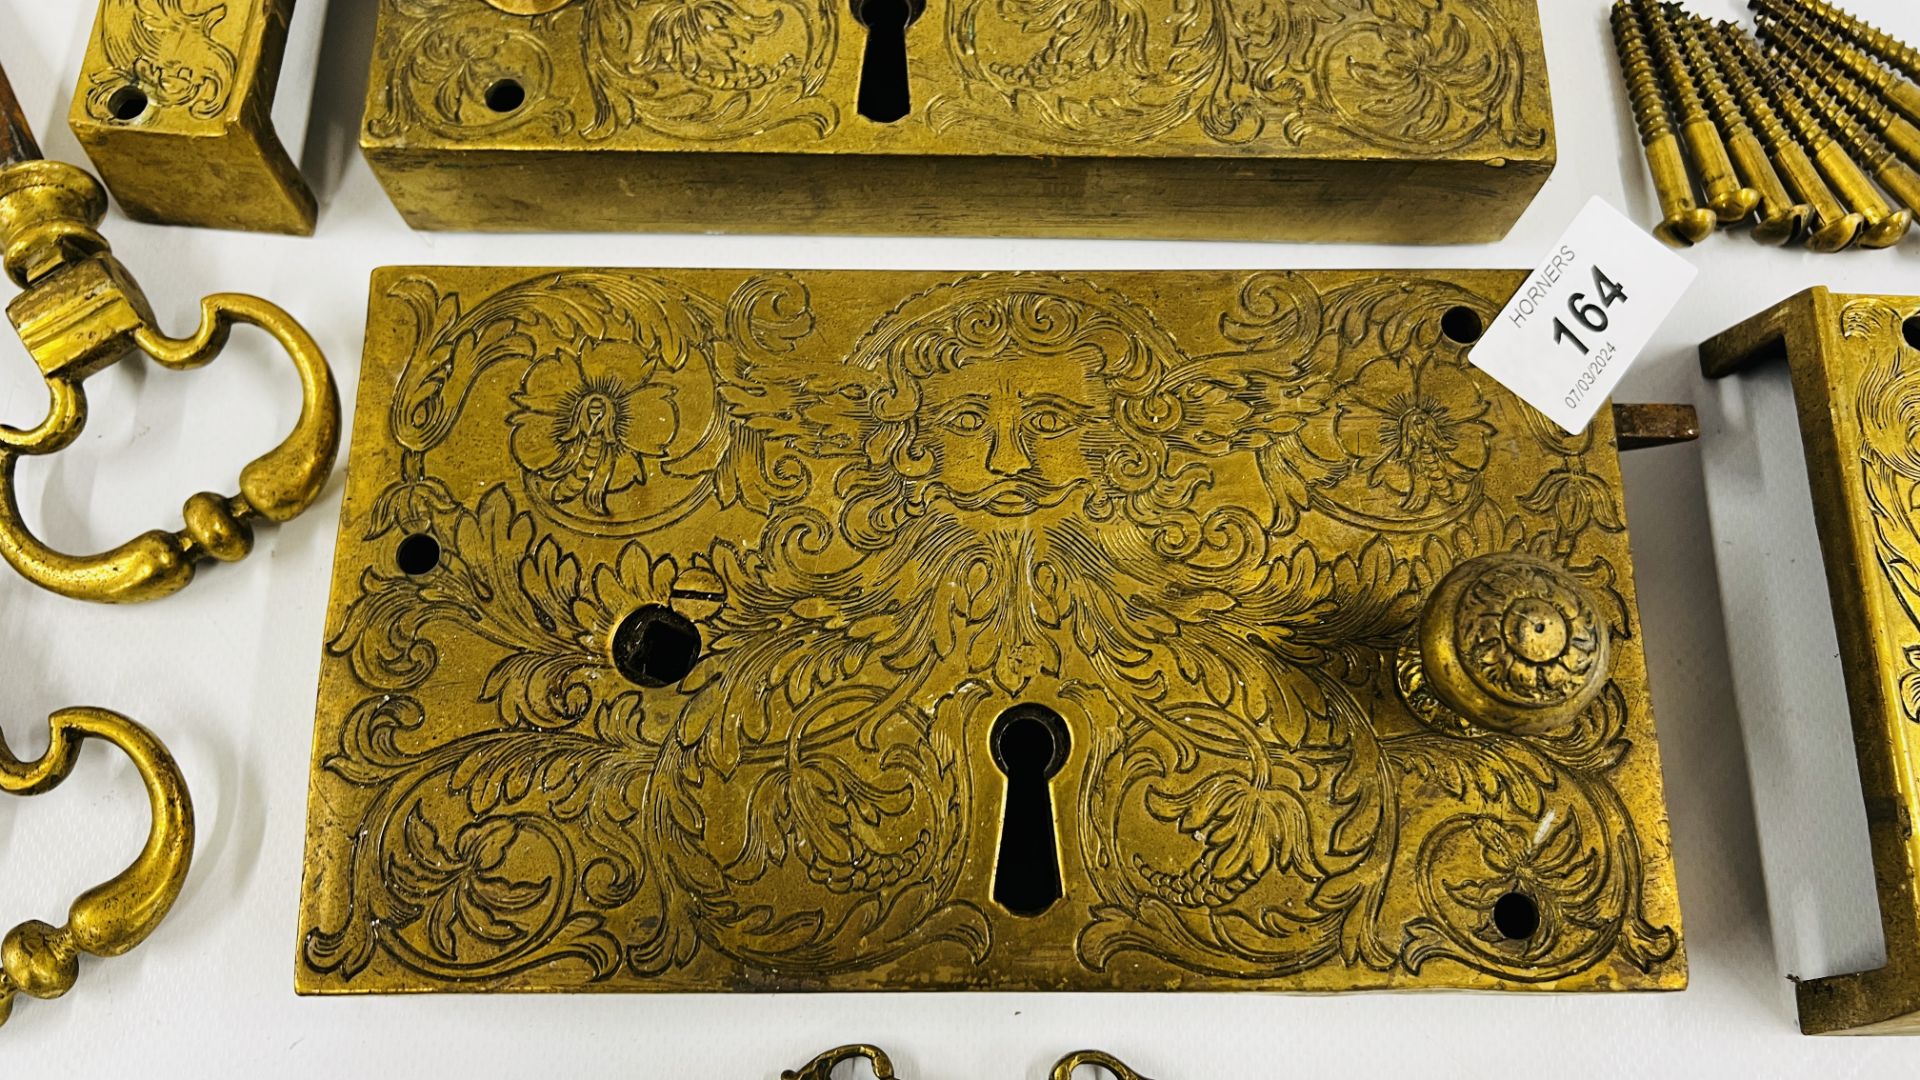 A PAIR OF ELABORATE ANTIQUE SOLID BRASS DOOR LOCKS PROBABLY C18th RETAINING THE ORIGINAL KEYS, - Image 2 of 12